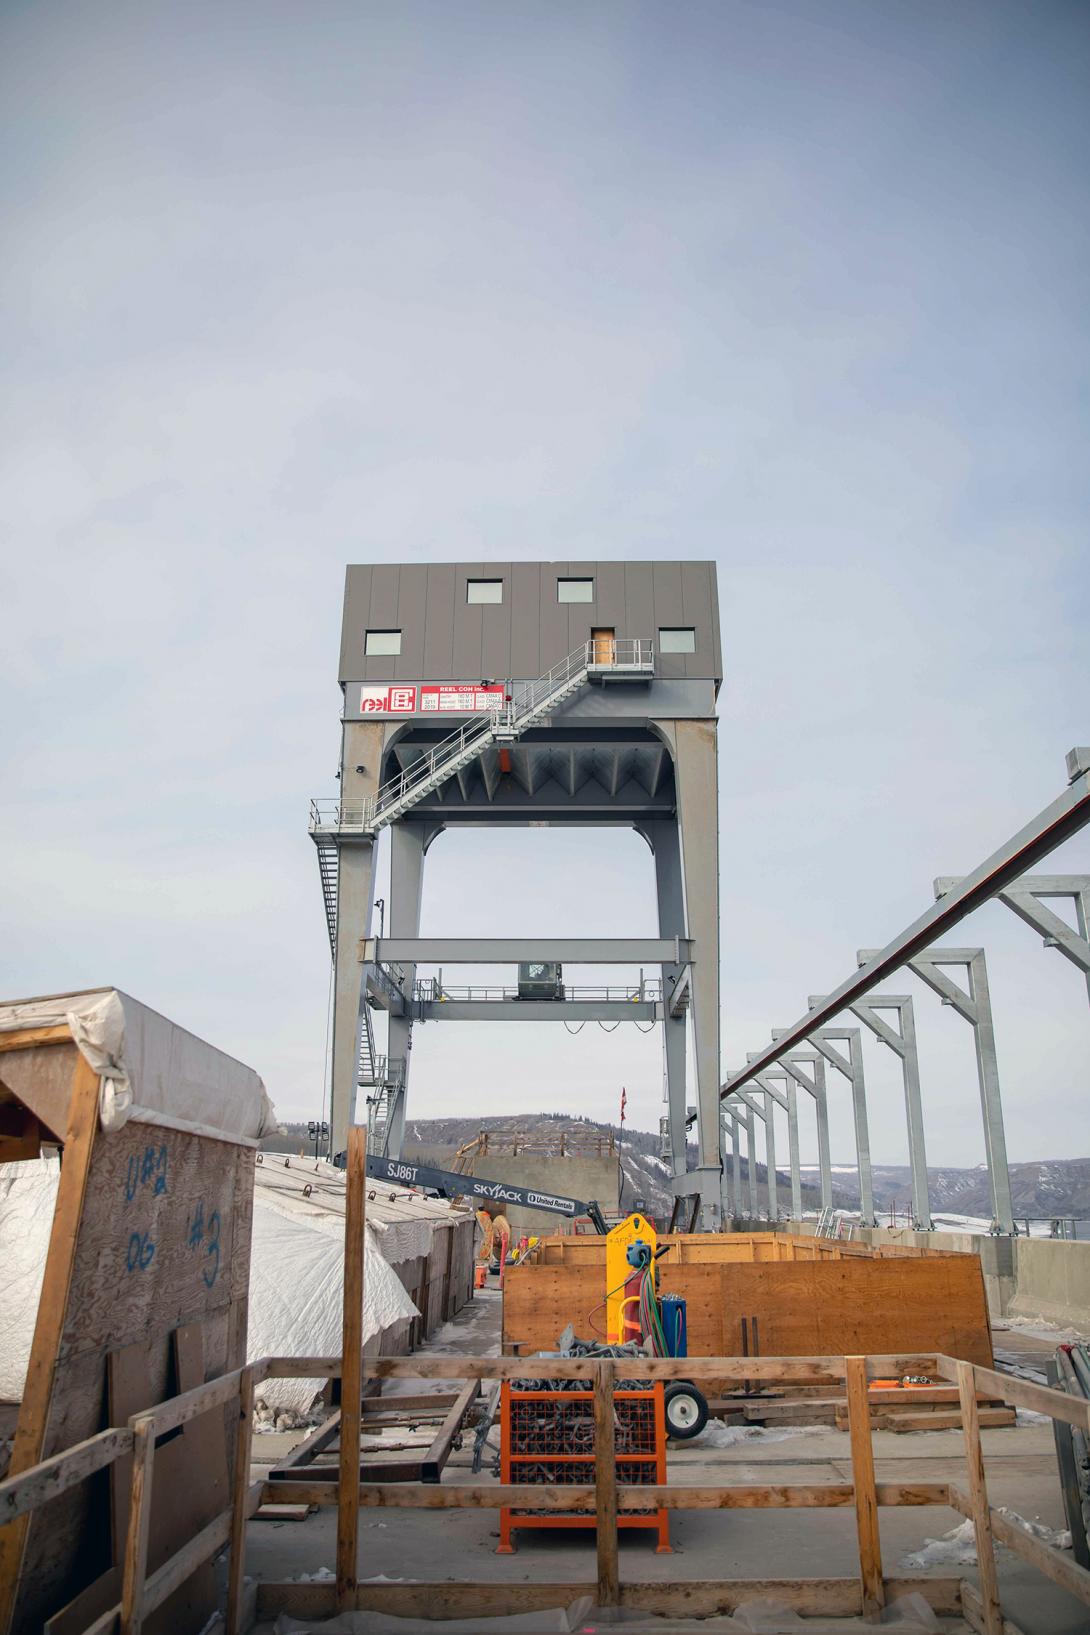 This gantry crane lifts the intake gates. It is on rails to allow movement between intake units 1 through 6. | March 2023